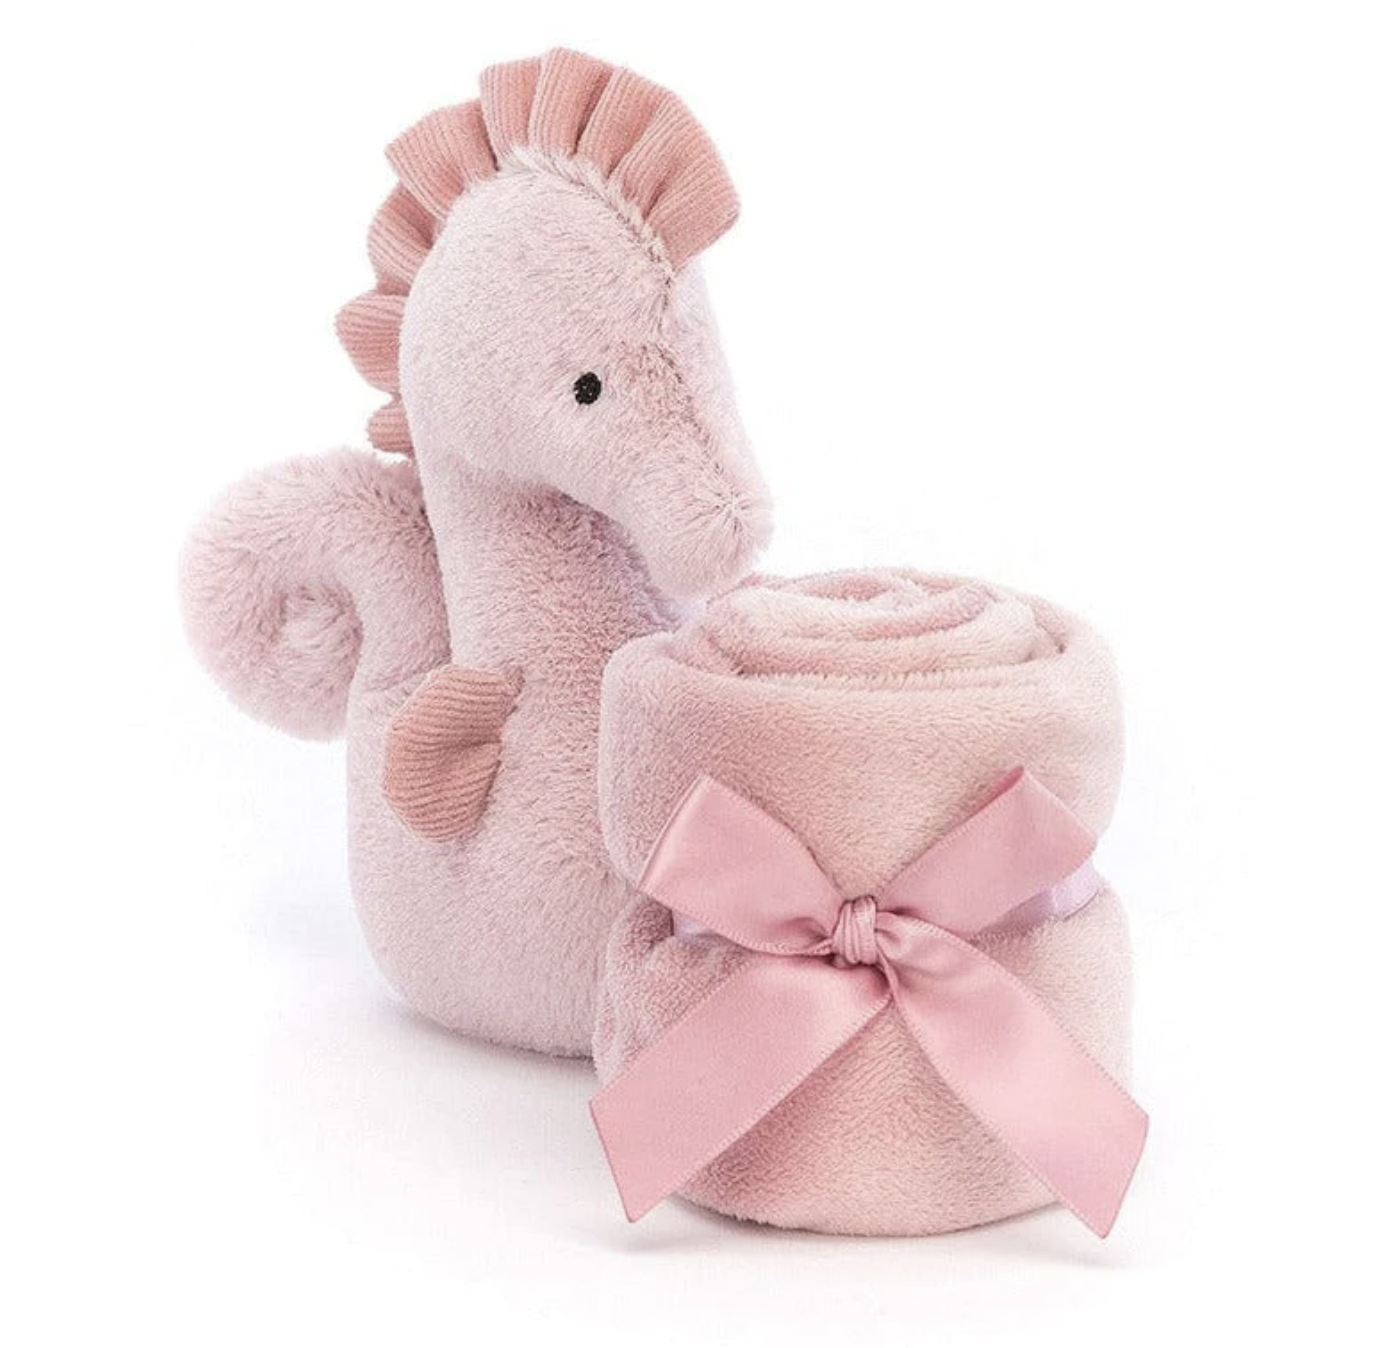 Sienna Seahorse Soother